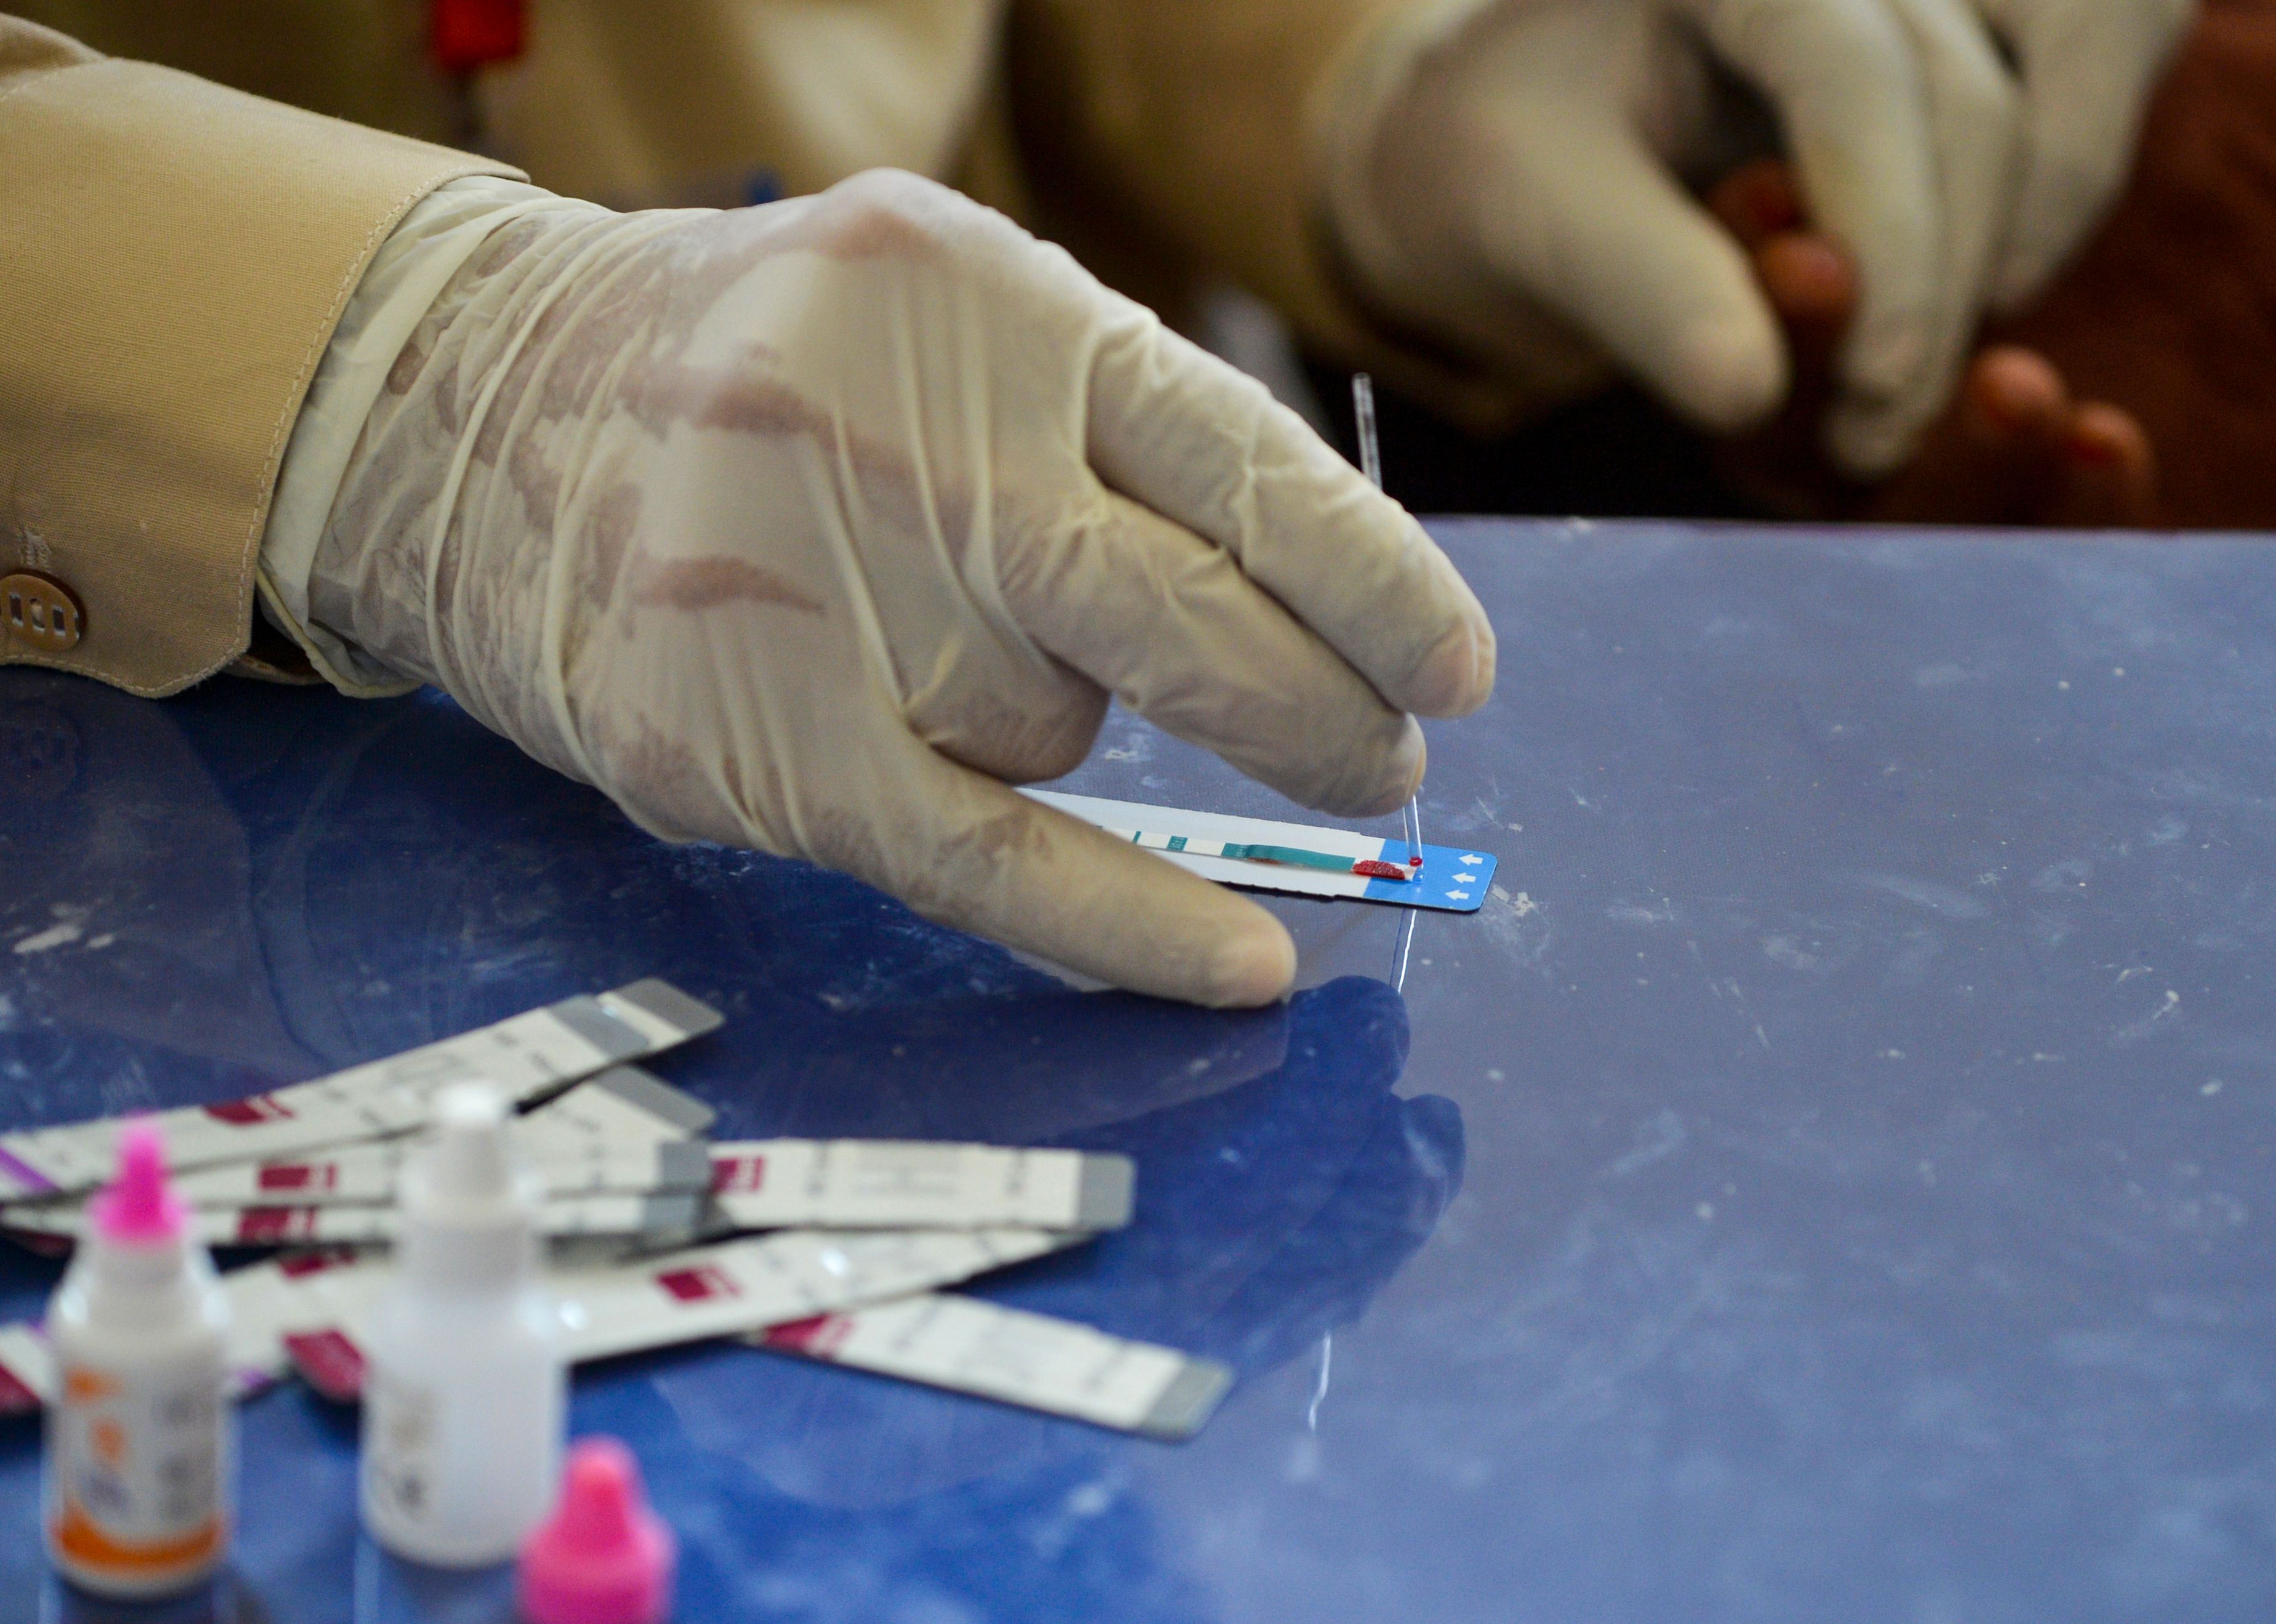 In this image taken on May 8, 2019, a Pakistani doctor examines the blood sample from a woman for a HIV test at a state-run hospital in Rato Dero in the district of Larkana of the southern Sindh province. (Photo credit should read RIZWAN TABASSUM/AFP/Getty Images)